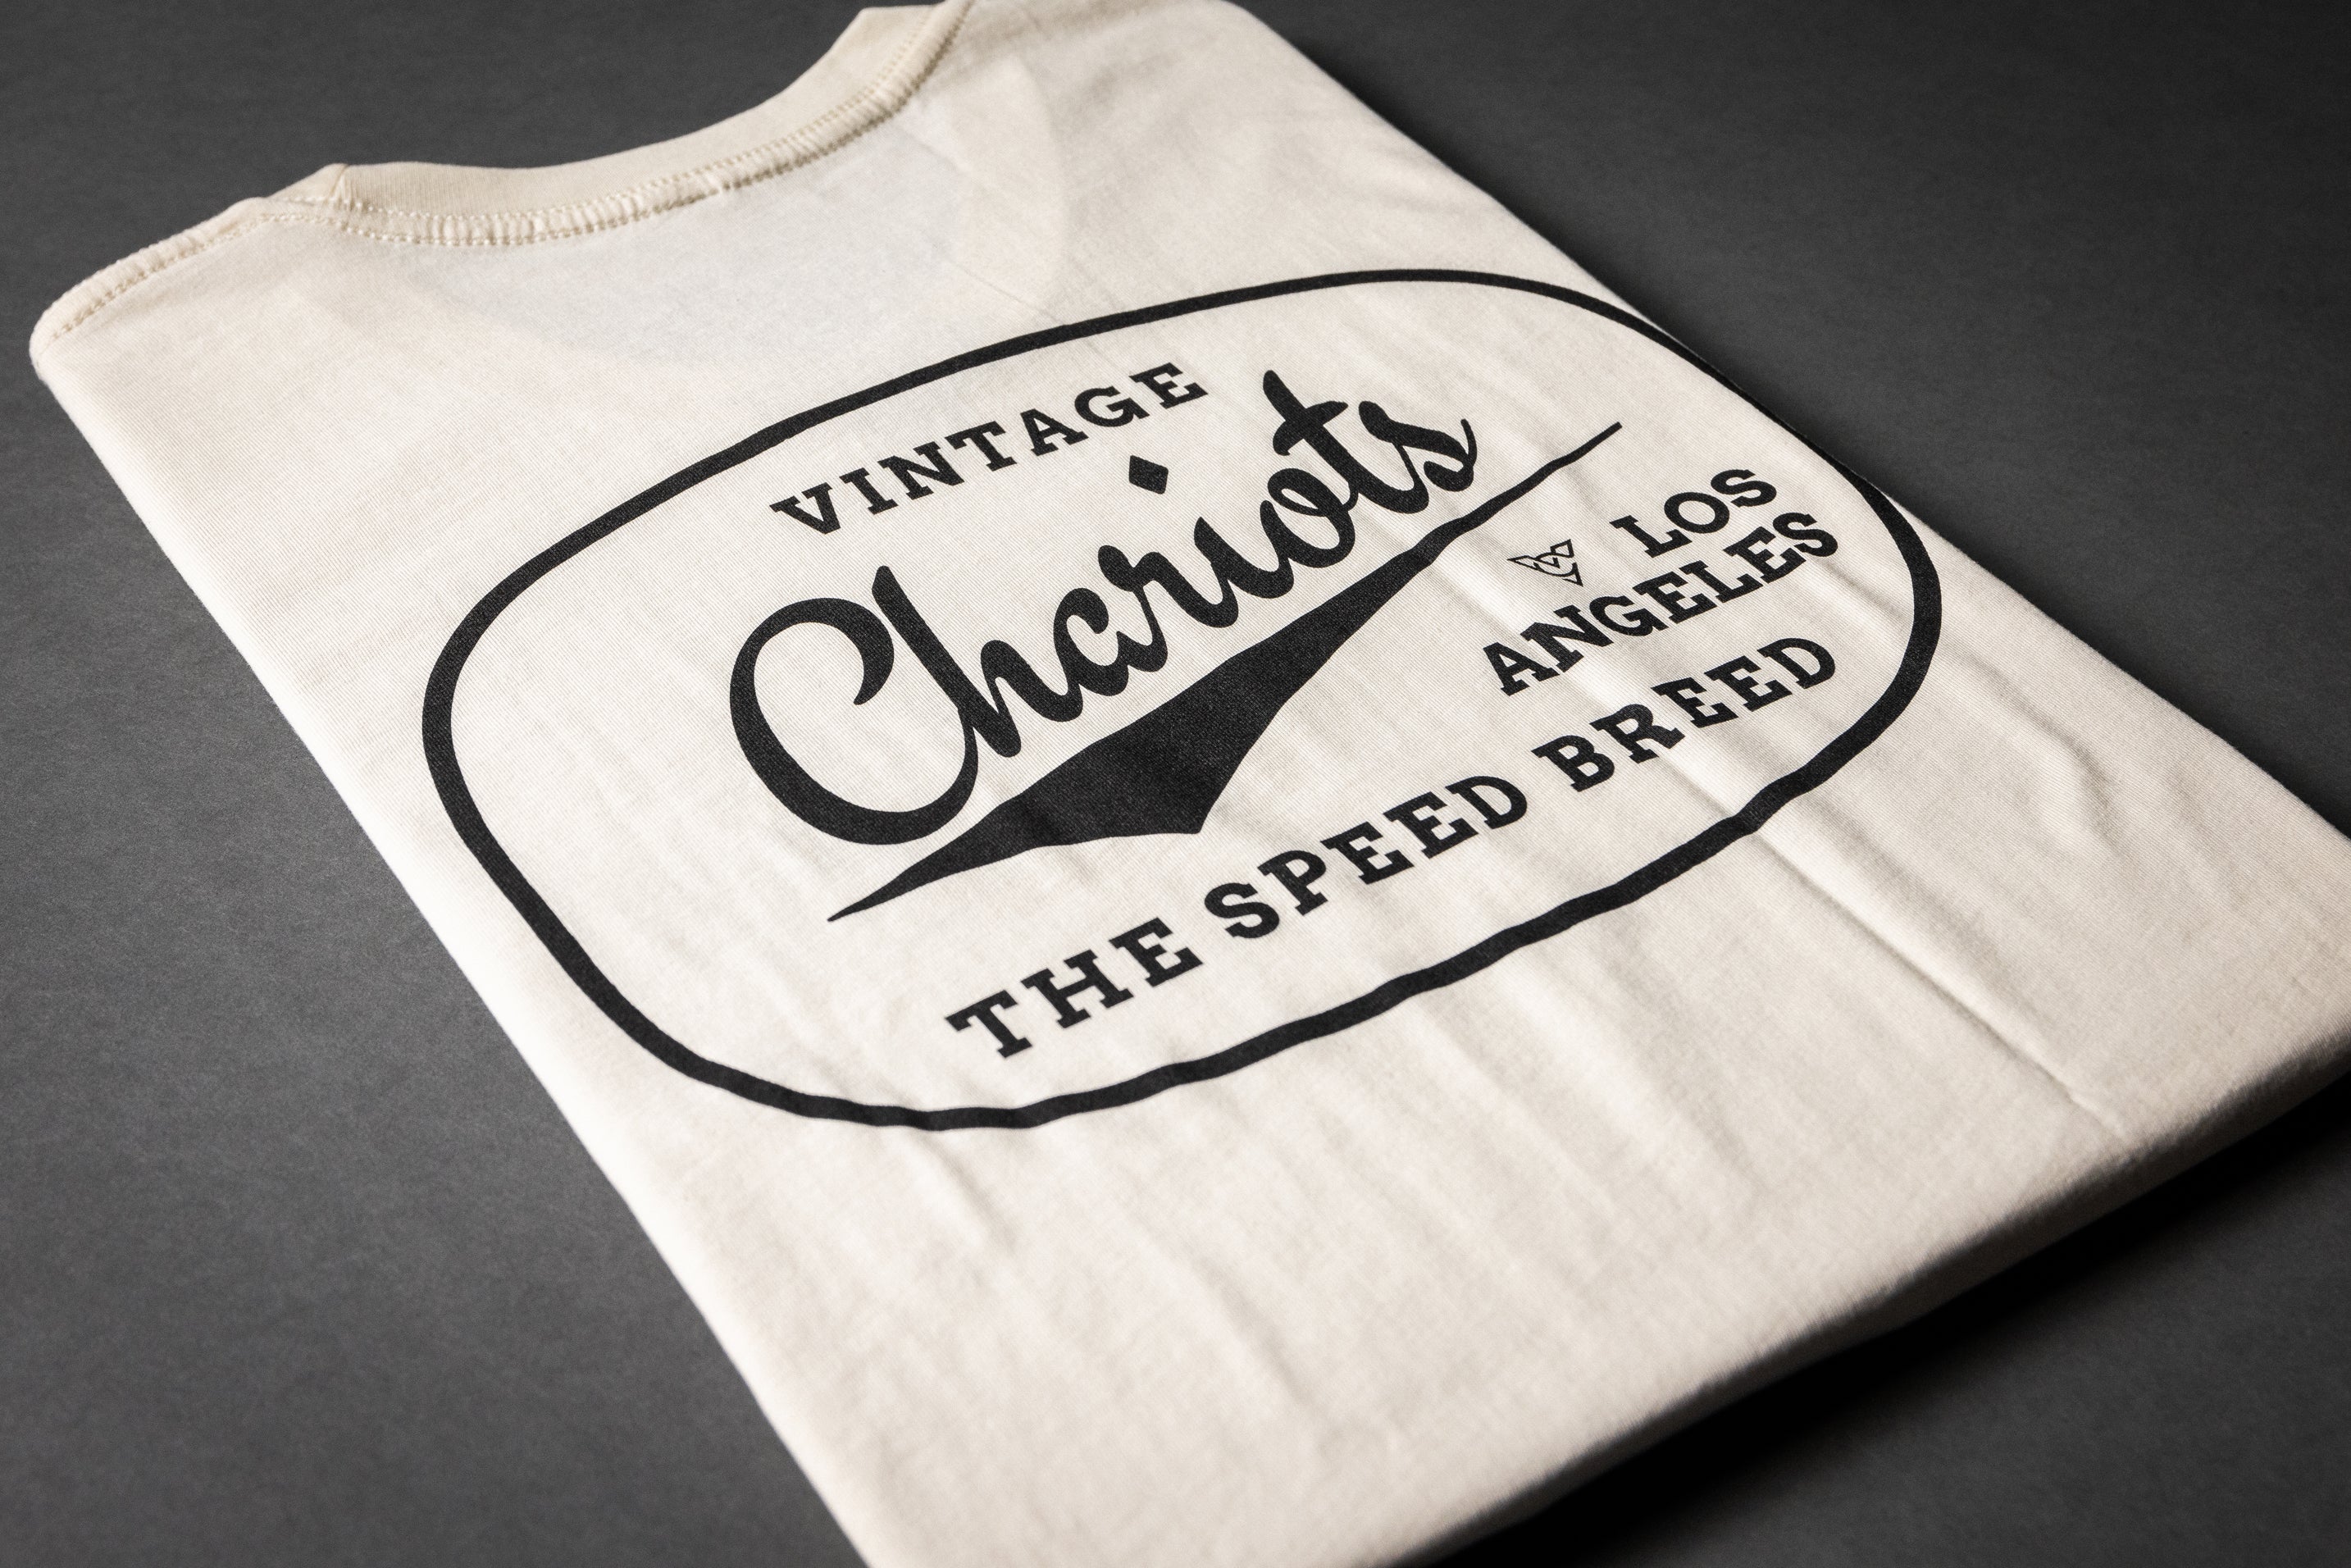 CHARIOTS OVAL LOGO TEE (Vintage White)